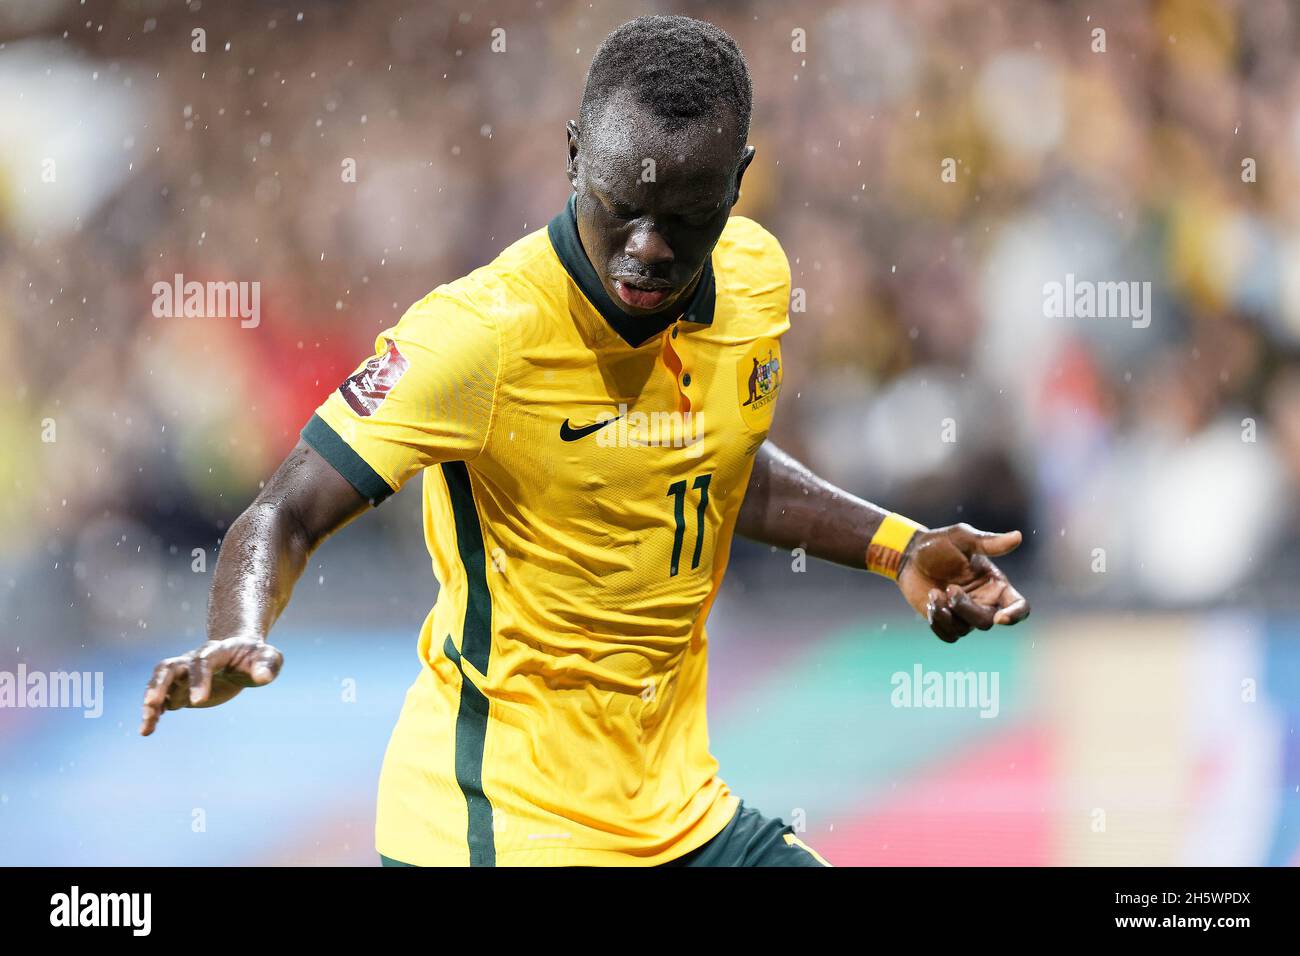 Sydney, Australia. 11th Nov, 2021. AWER MABIL of Australia controls the ball during the FIFA World Cup AFC Asian Qualifier match between the Australia Socceroos and Saudi Arabia at CommBank Stadium on November 11, 2021 in Sydney, Australia Credit: IOIO IMAGES/Alamy Live News Stock Photo